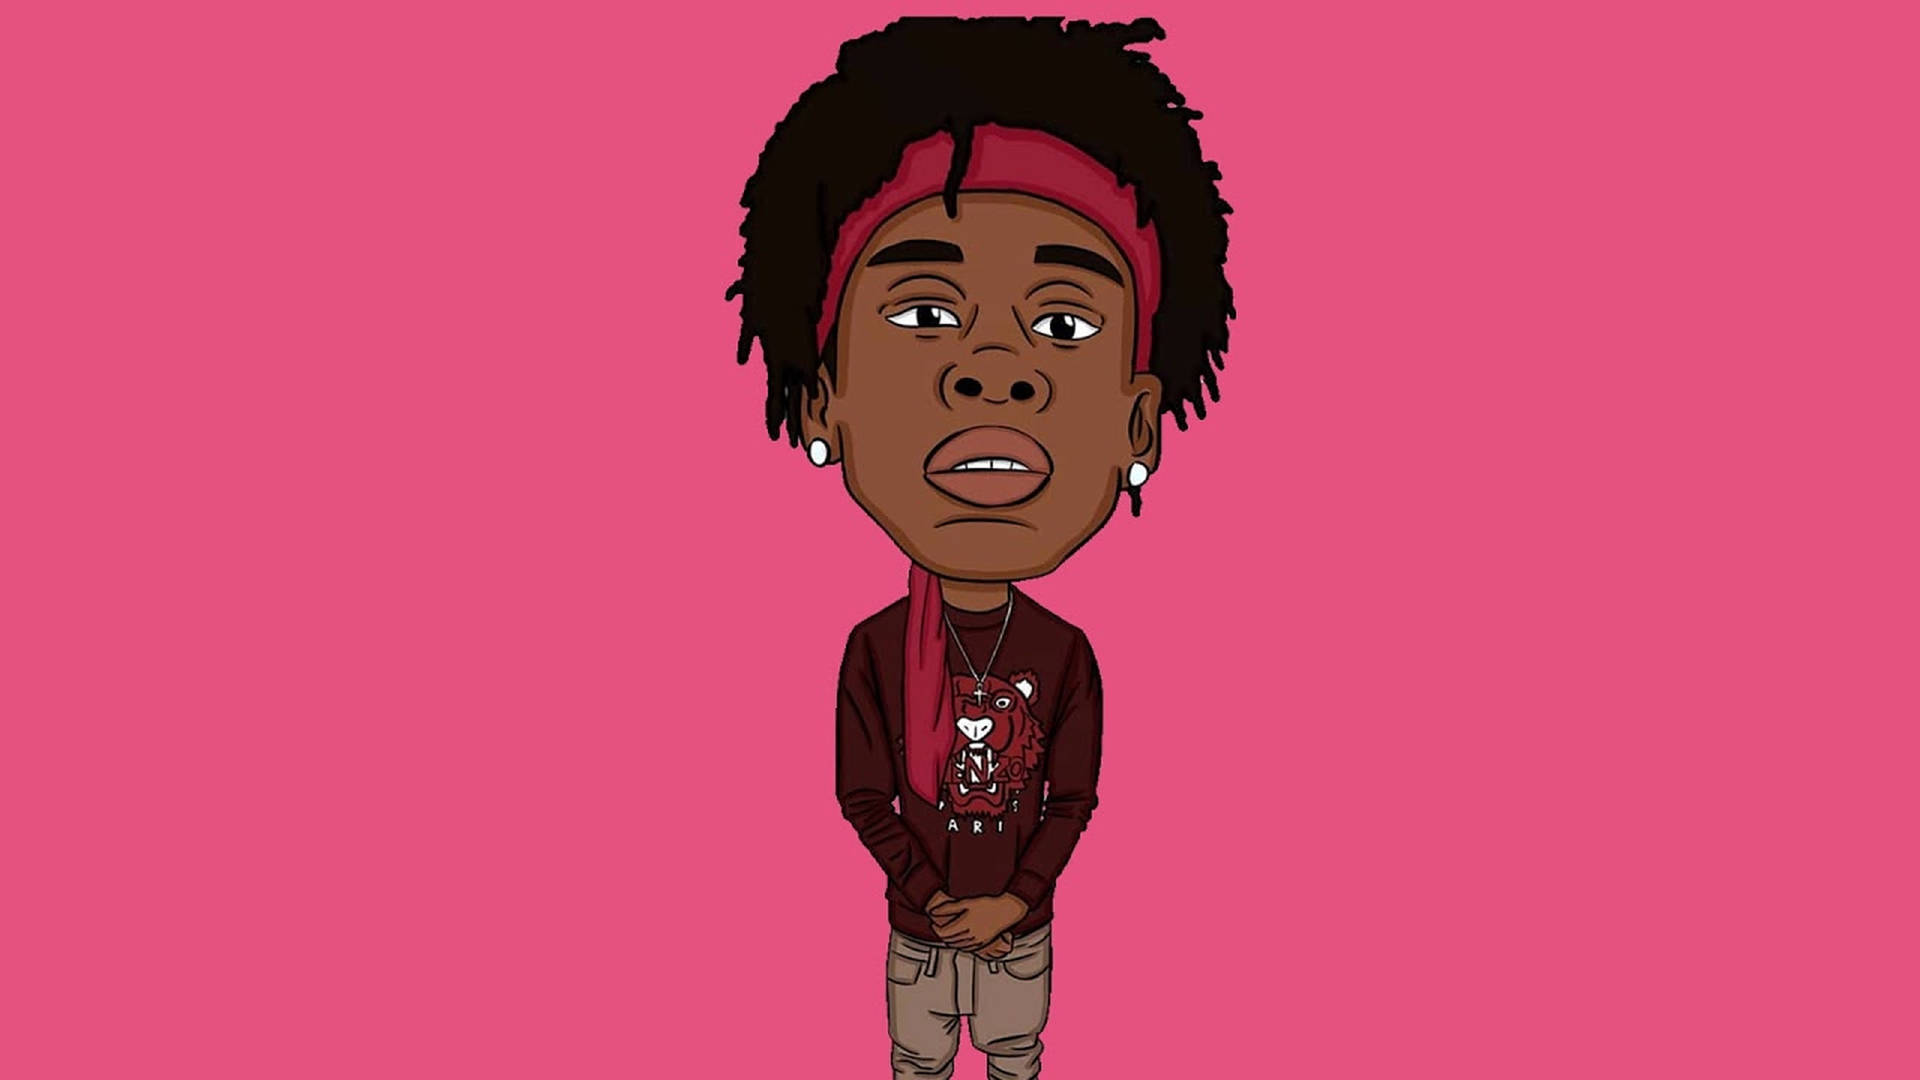 Polo G Background Wallpaper